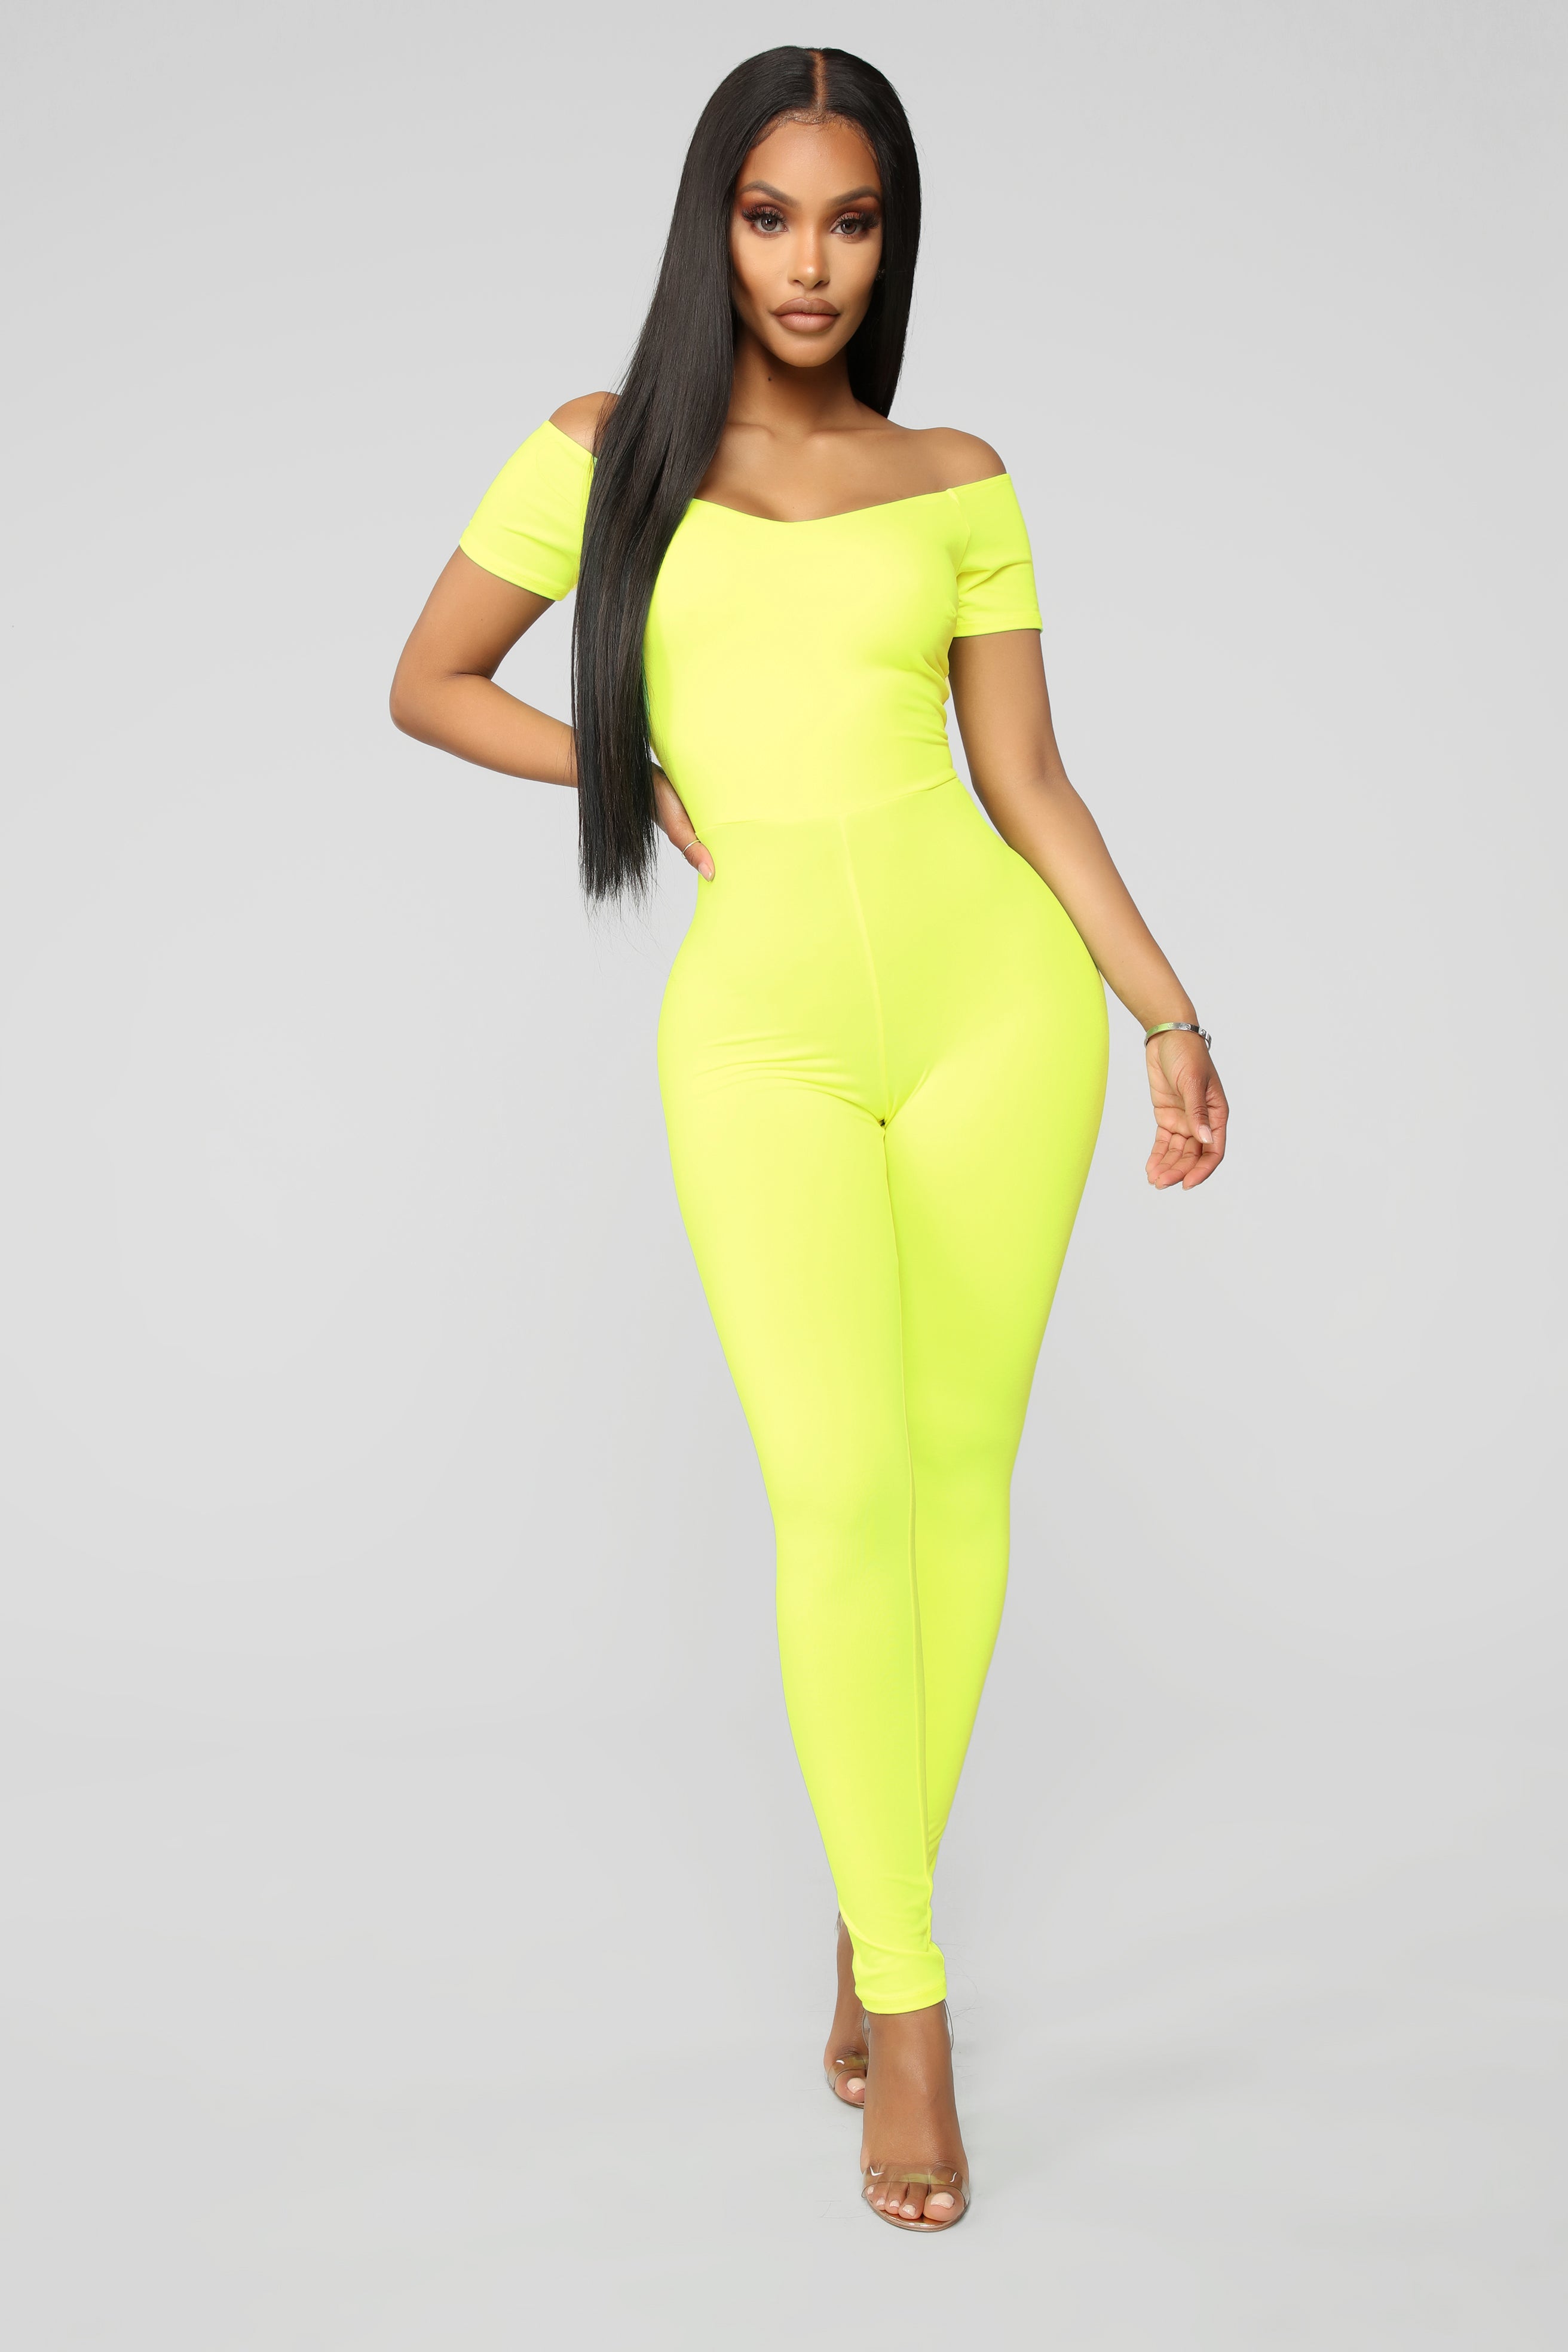 Love Your FN Body Jumpsuit - Neon Yellow